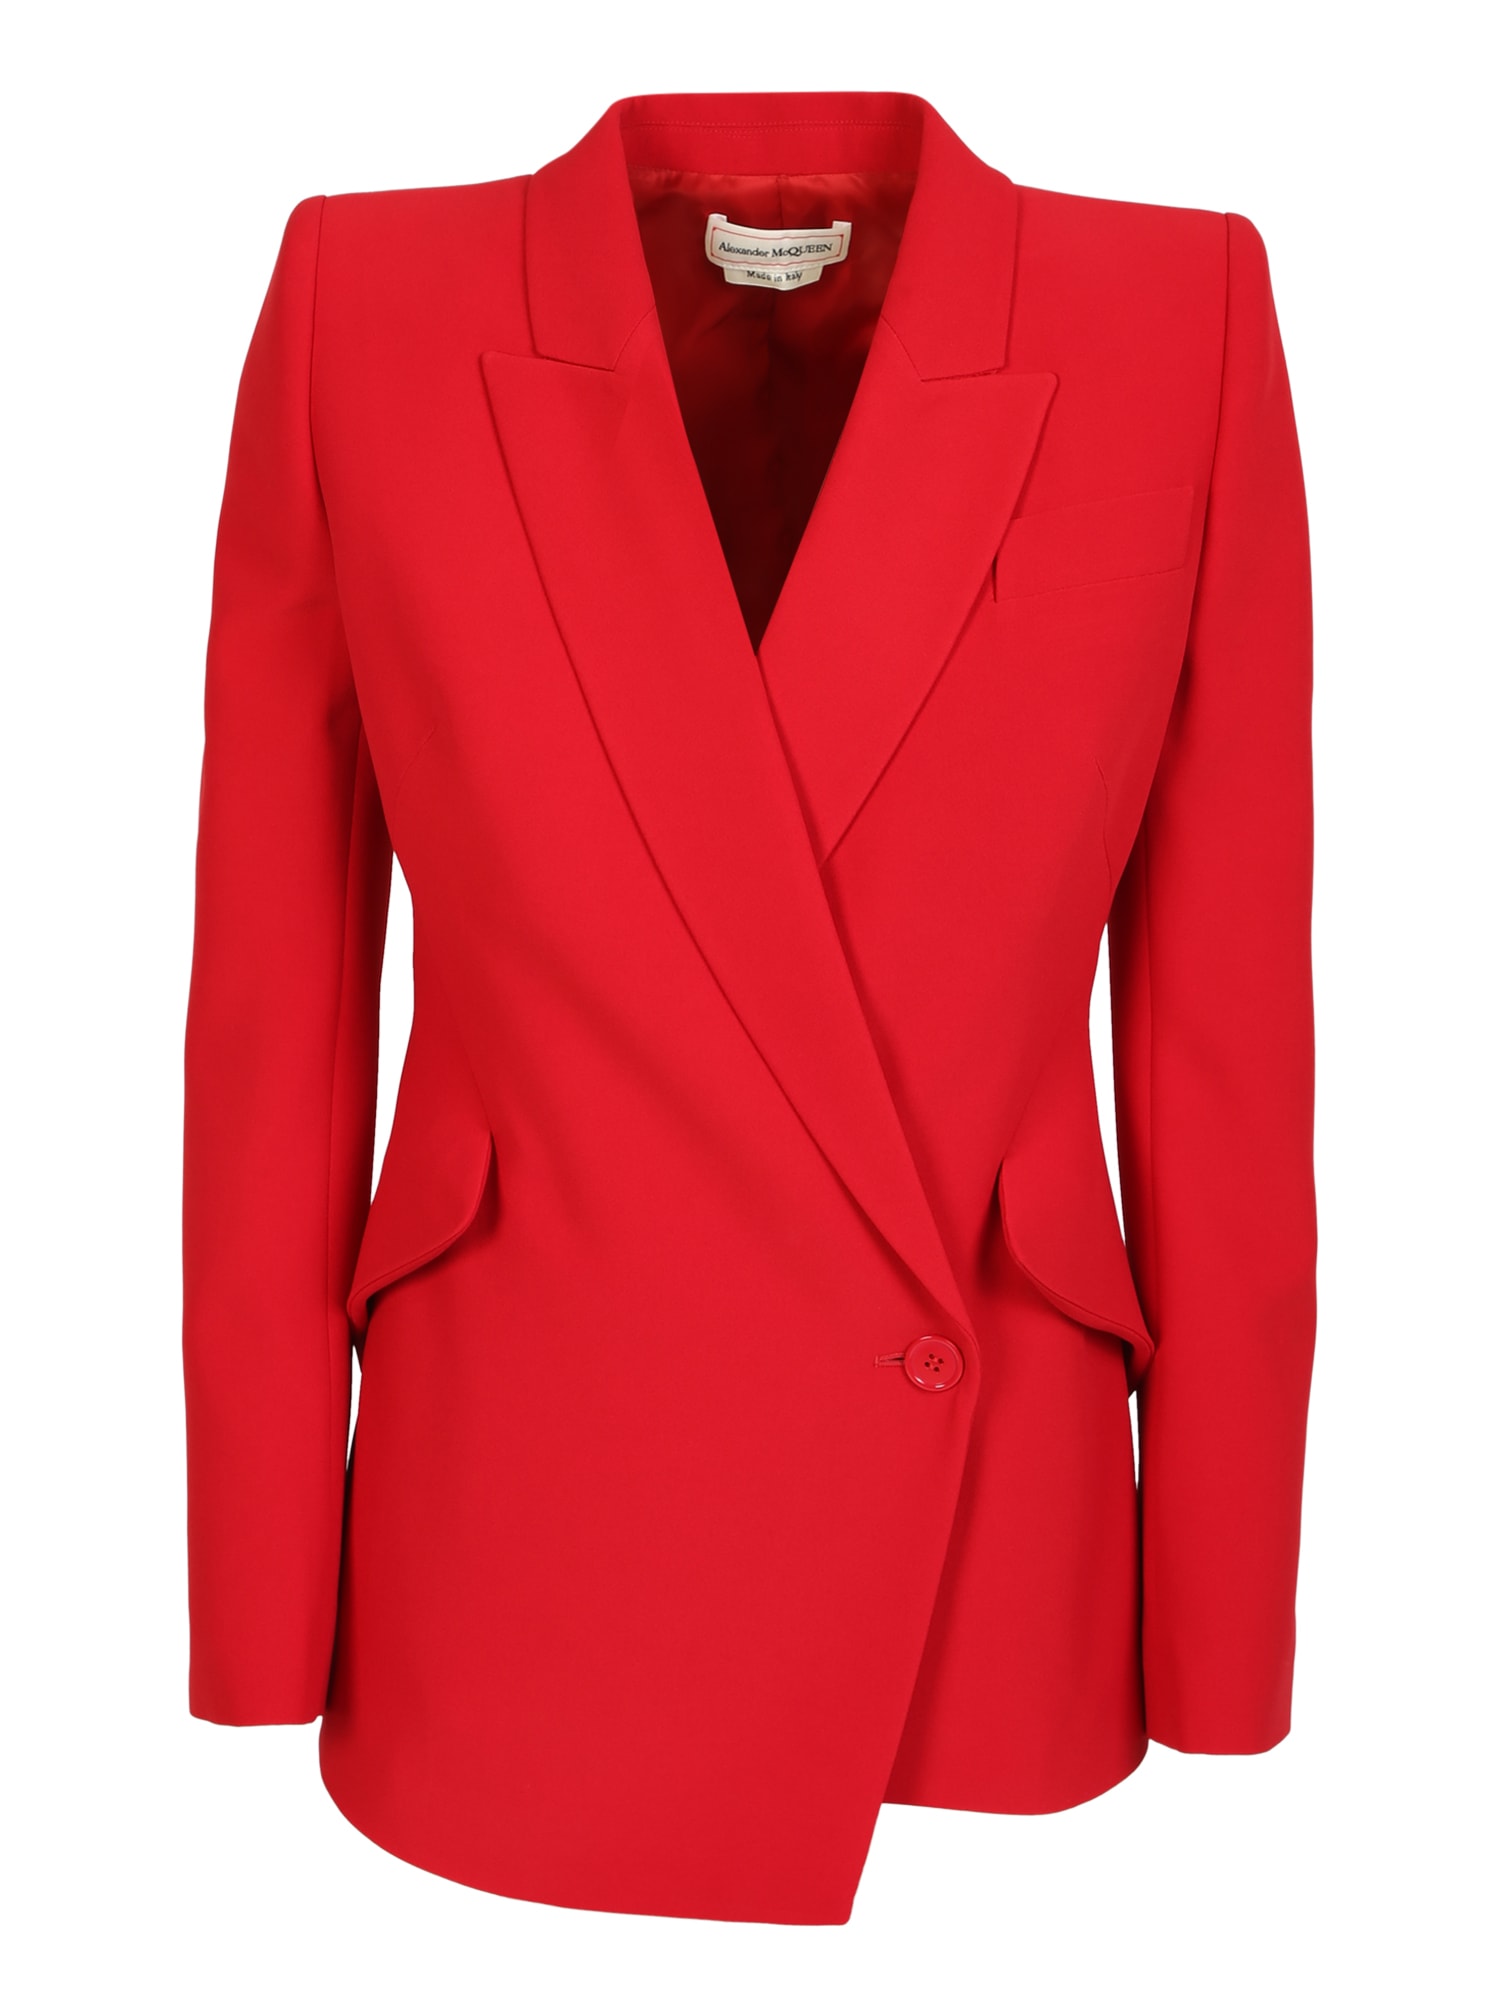 Asymmetrical Blazer By Alexander Mcqueen; Unique And Unmistakable Garment That Follows The Iconic Lines Of The Maison